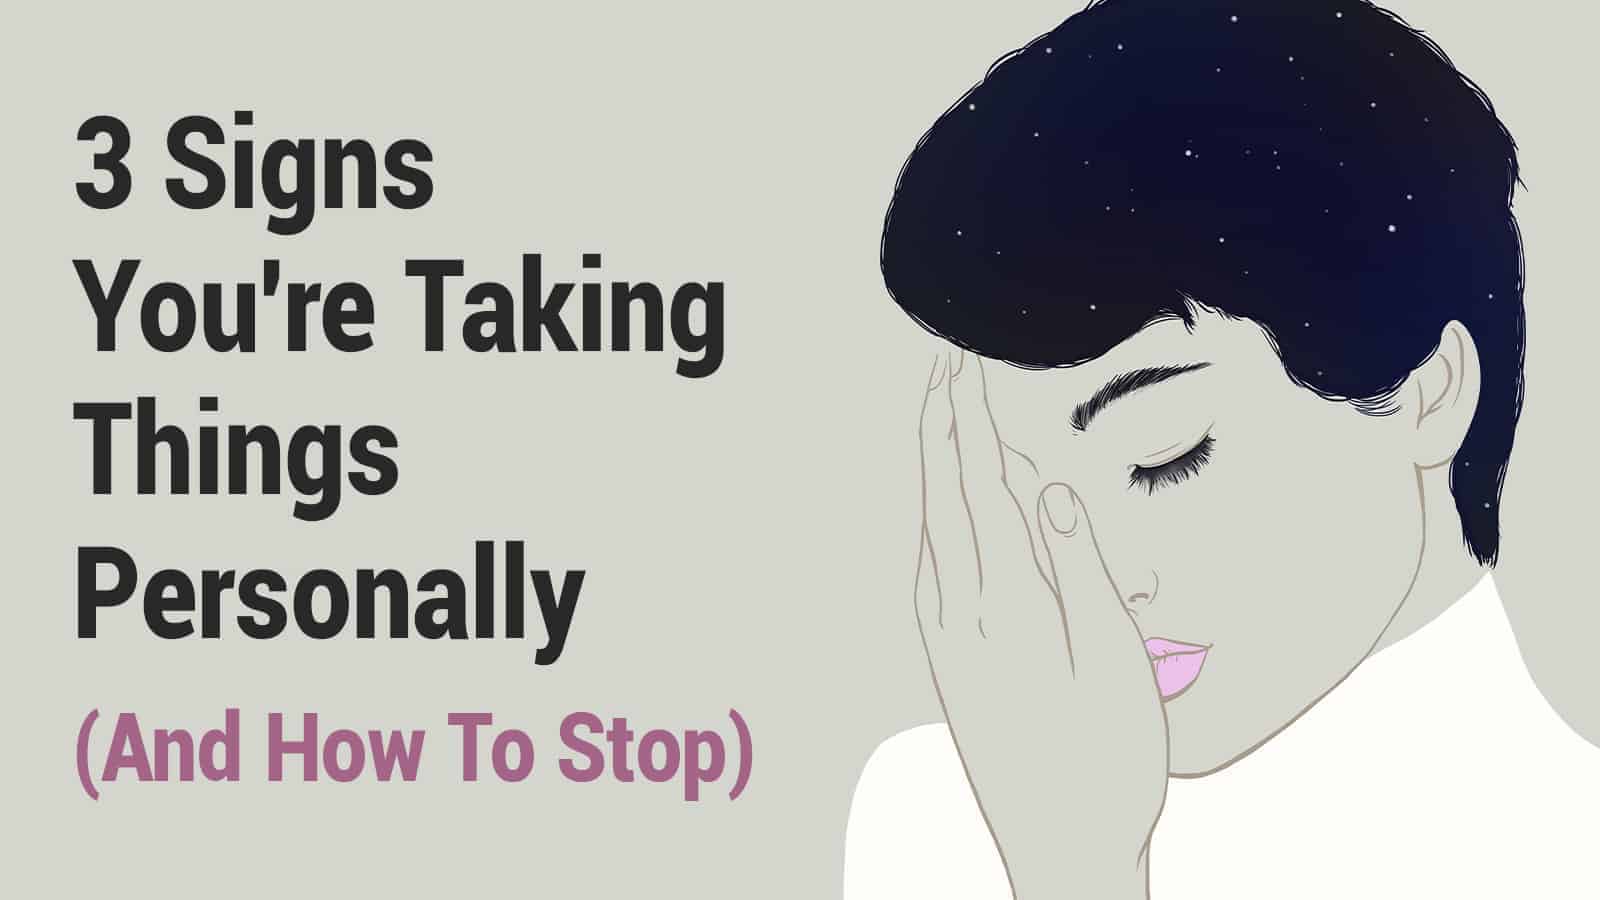 3 Signs You’re Taking Things Personally (And How To Stop)